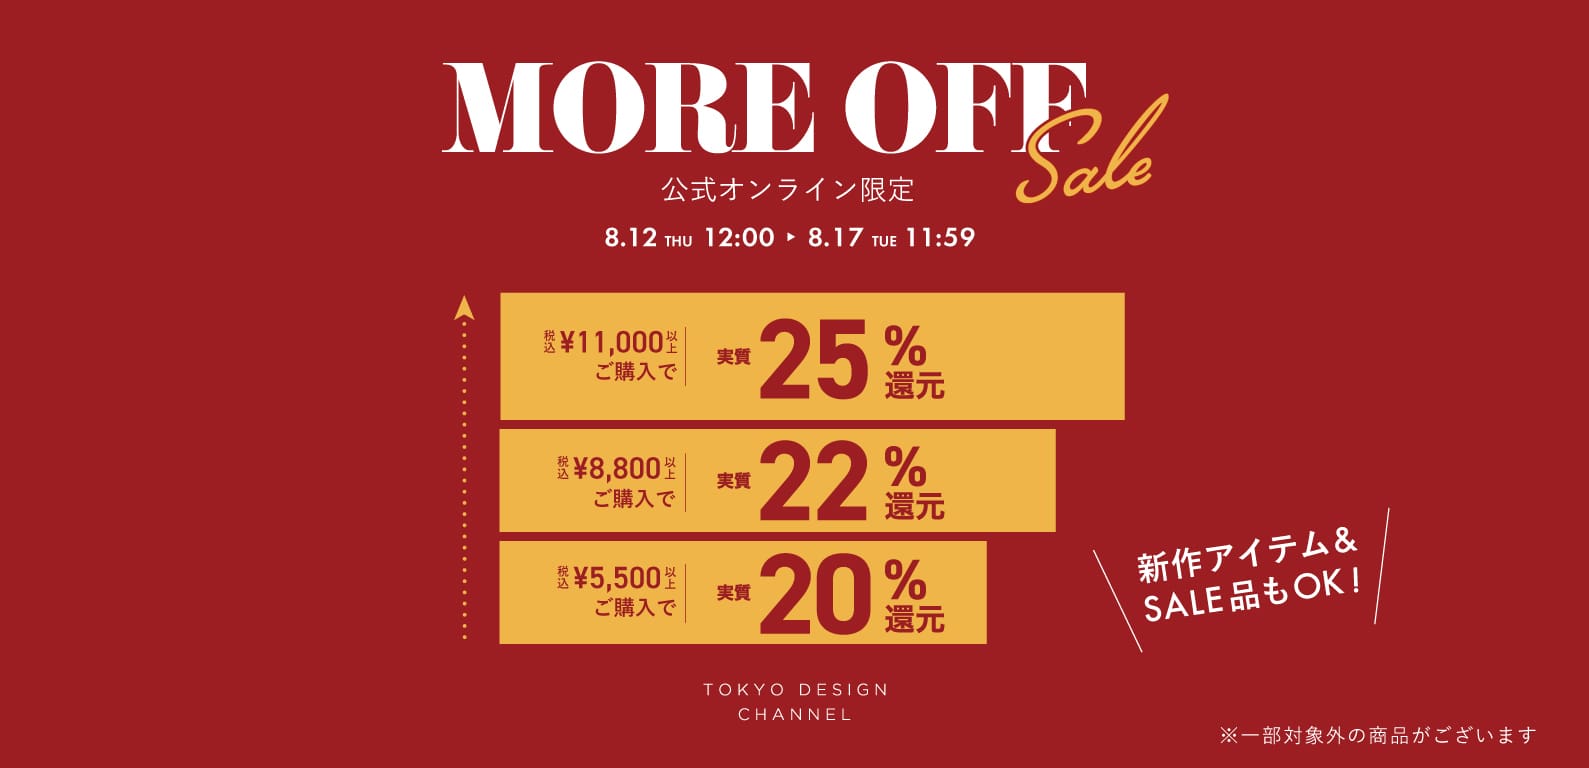 TDC | MORE OFF SALE